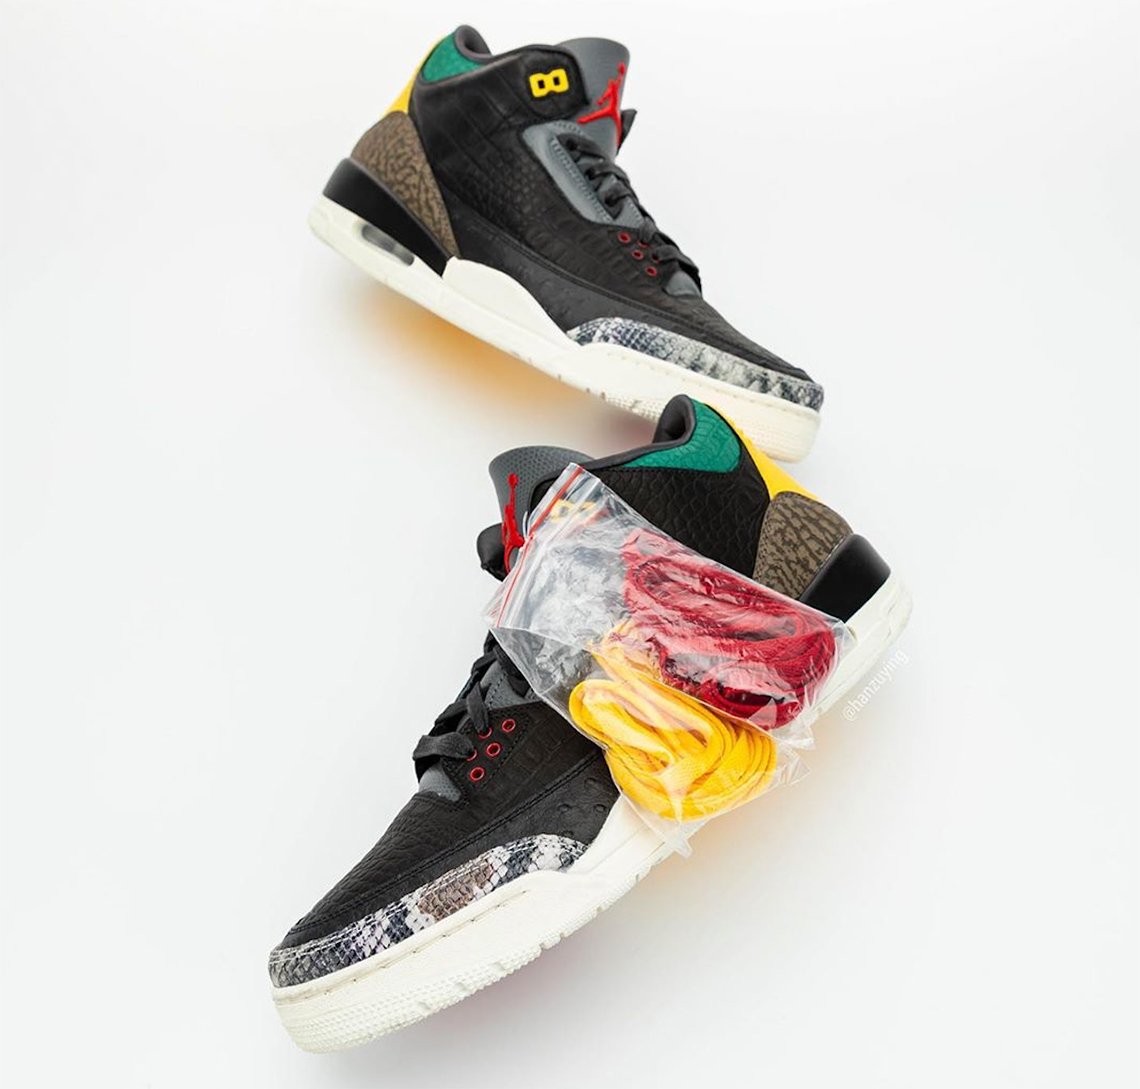 check out this brand-new Air Jordan 1 Mid thats ideal for summer Animal Instinct 2 0 Cv3583 003 6